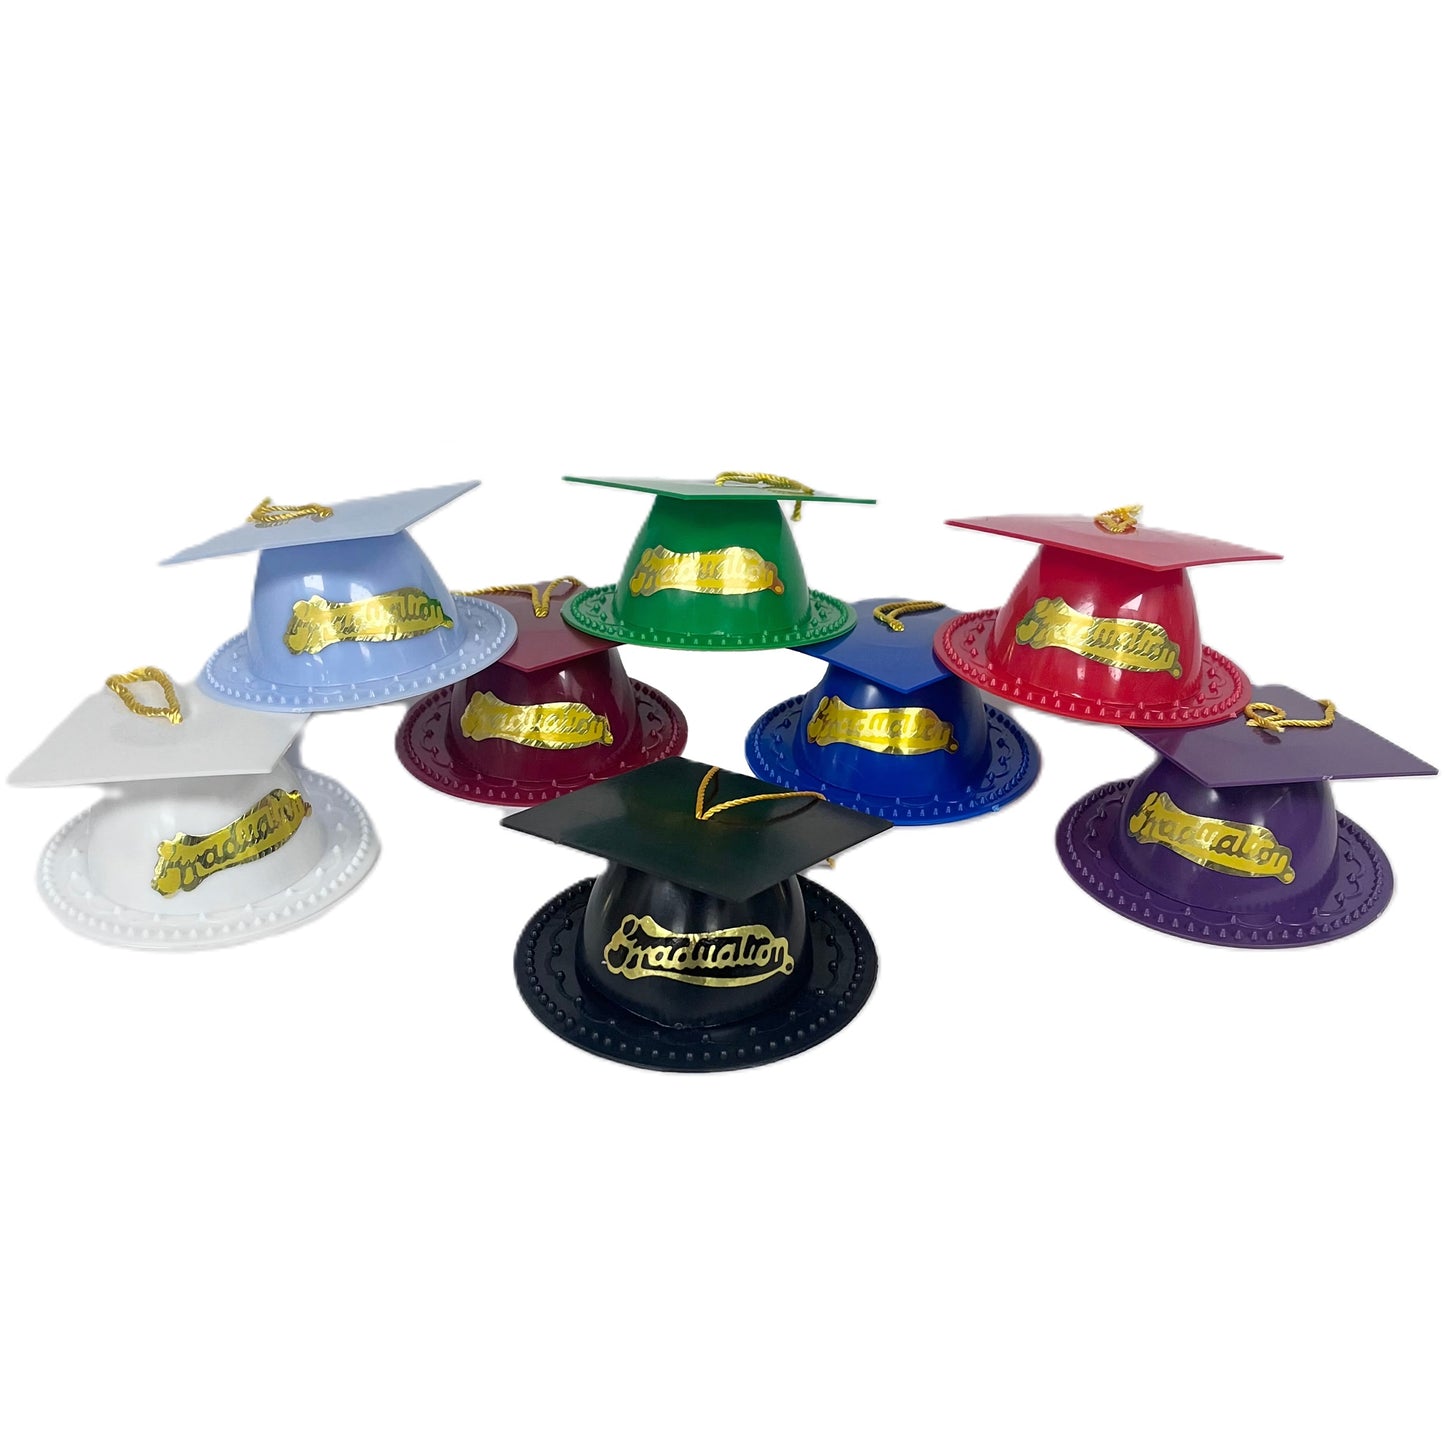 Colorful mini graduation hat cake toppers with 'Graduation' written on the brim in gold, available in multiple colors for diverse graduation party themes.